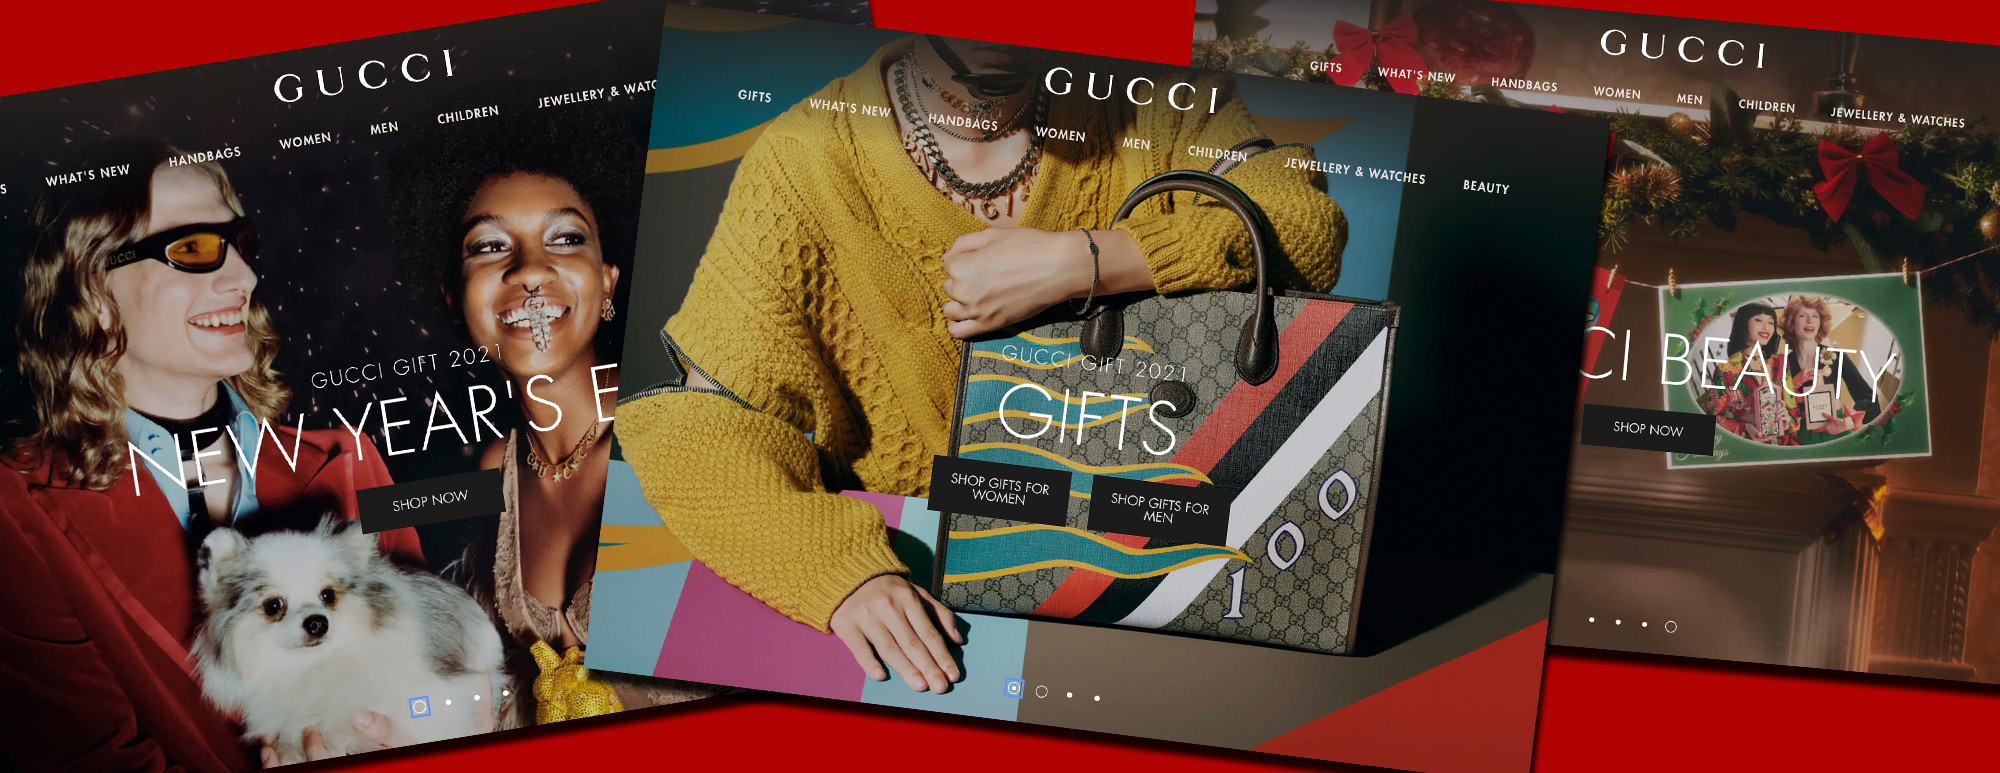 Editor's picks for Christmas from Gucci's new Singapore e-commerce site